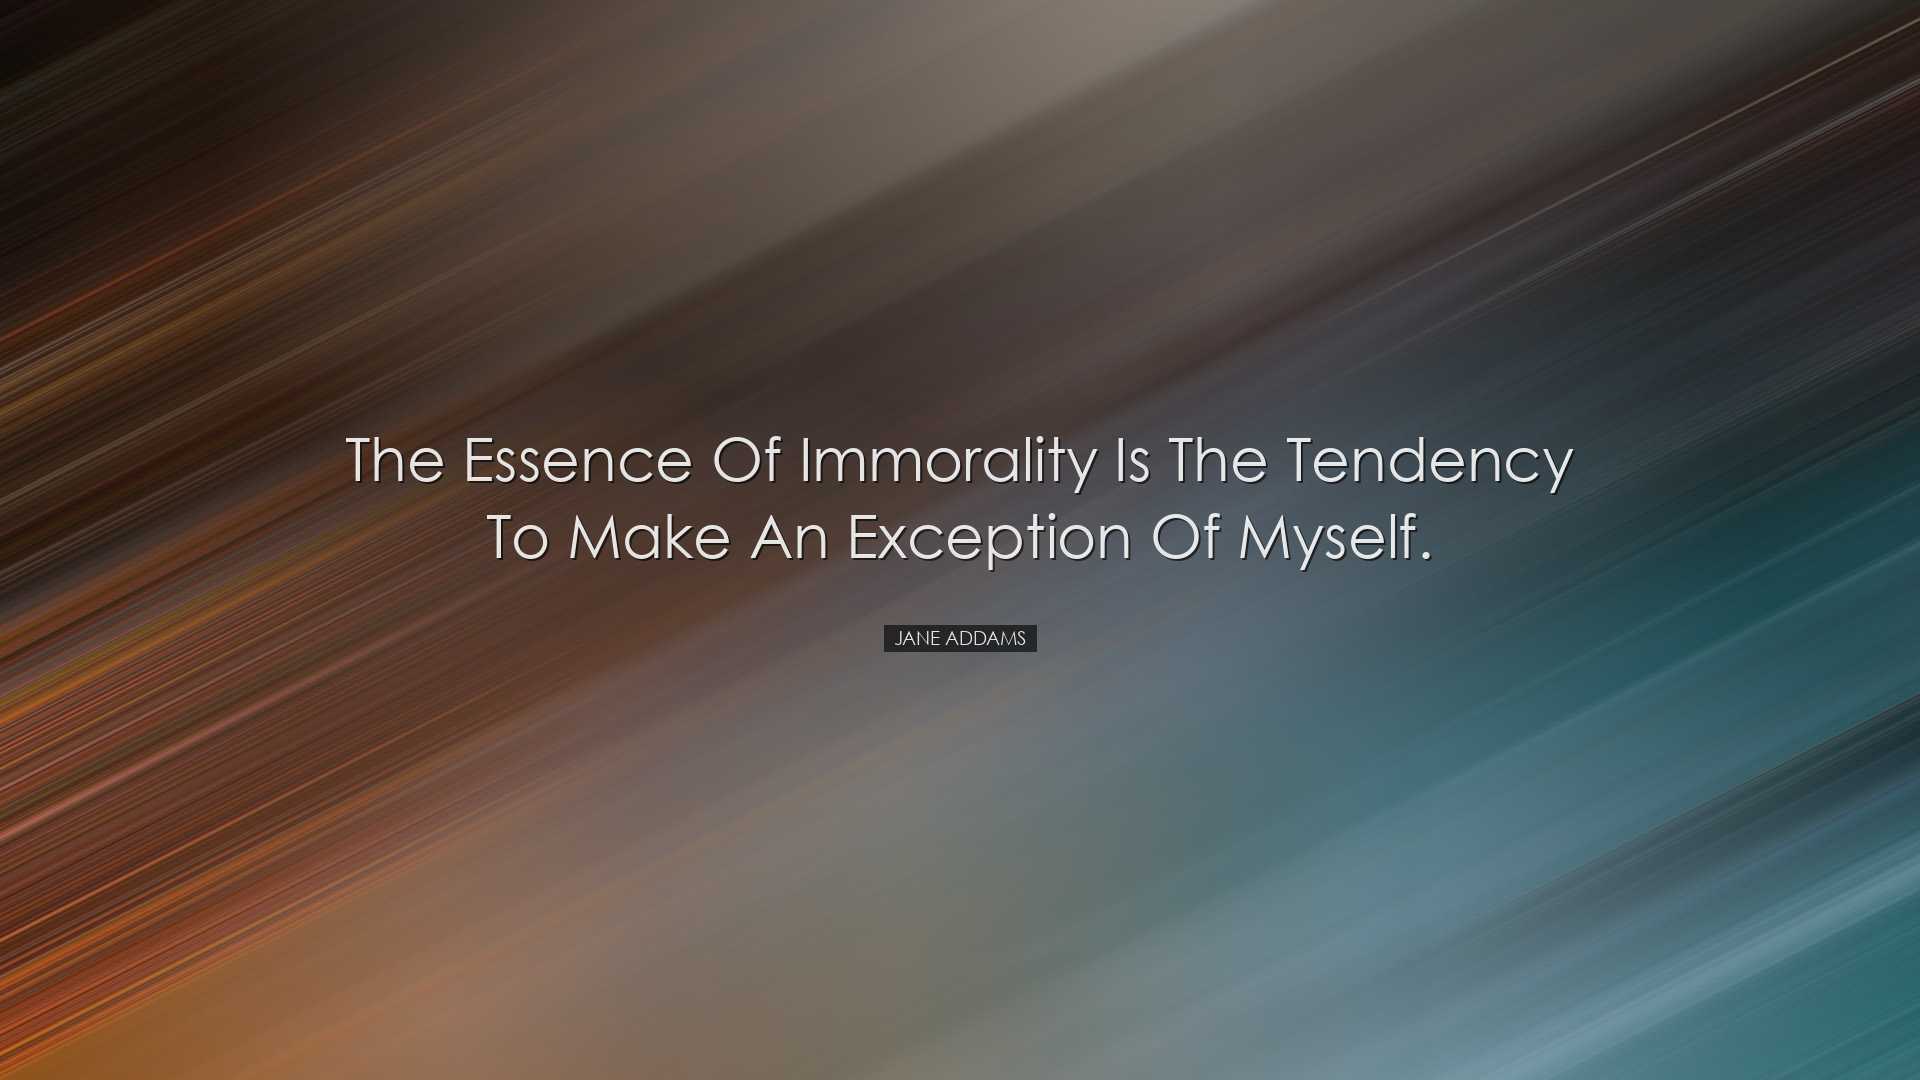 The essence of immorality is the tendency to make an exception of